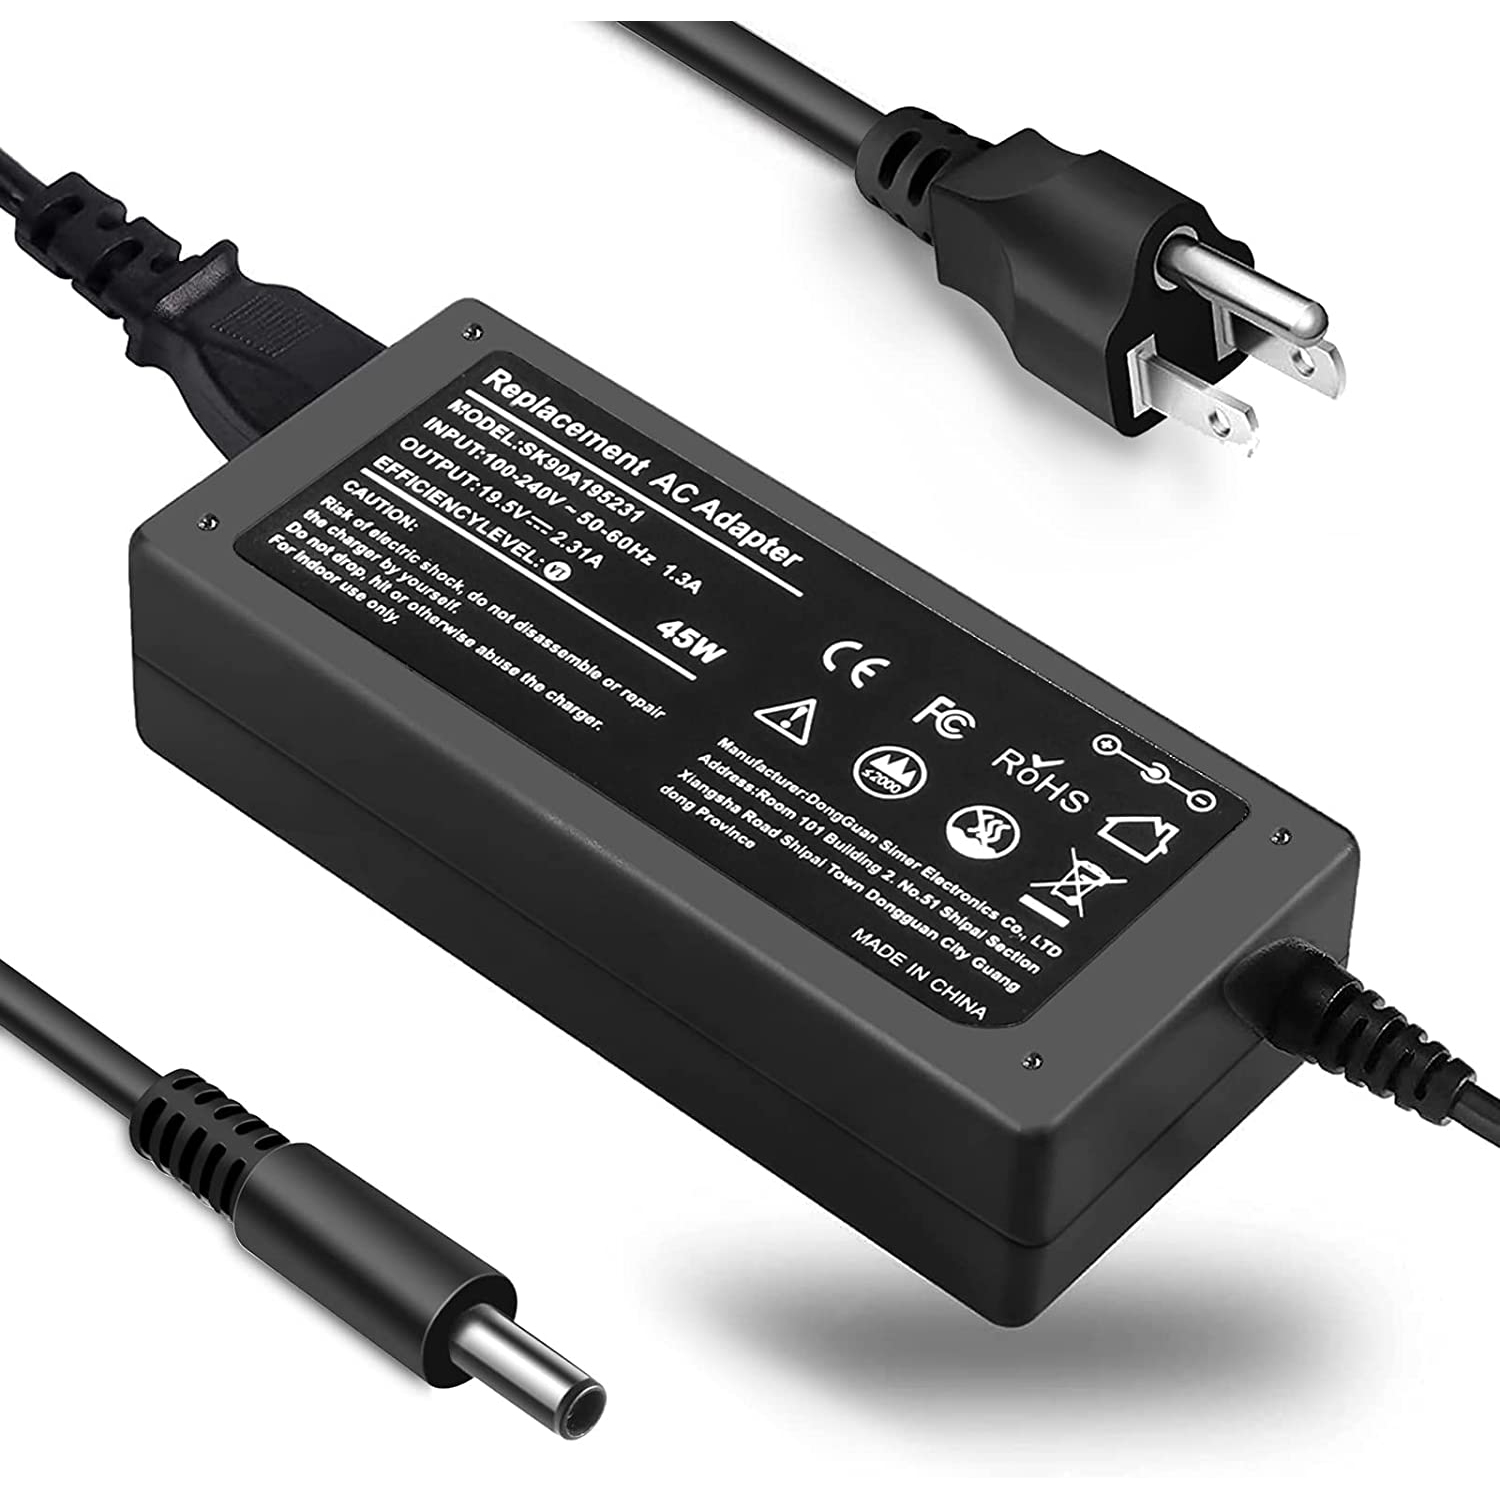 45W AC Adapter Laptop Charger Compatible for Dell Inspiron 15 3000 5000 7000 Series 14-5000 13-7000 13-5000 17-7000